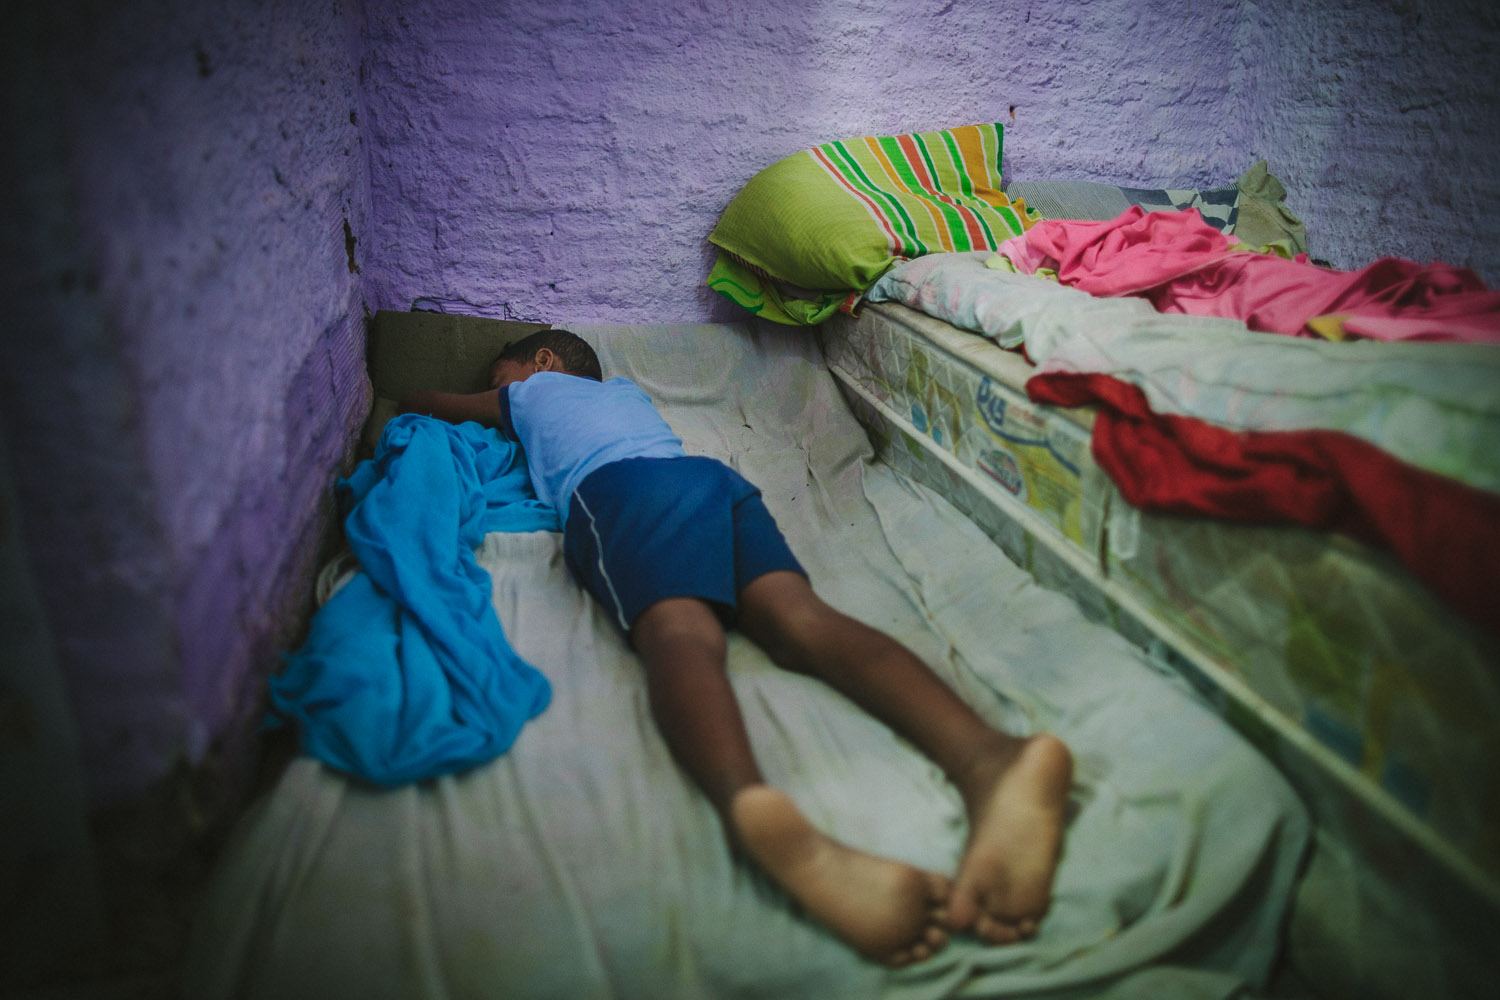   Emidio starts his day waking up from a very thin mattress on the floor. Emidio's entire house (housing 4 people---soon to be 5) is perhaps no larger than 8 feet by 10 feet. This is Emidio's morning routine before heading to classes at the Compassio